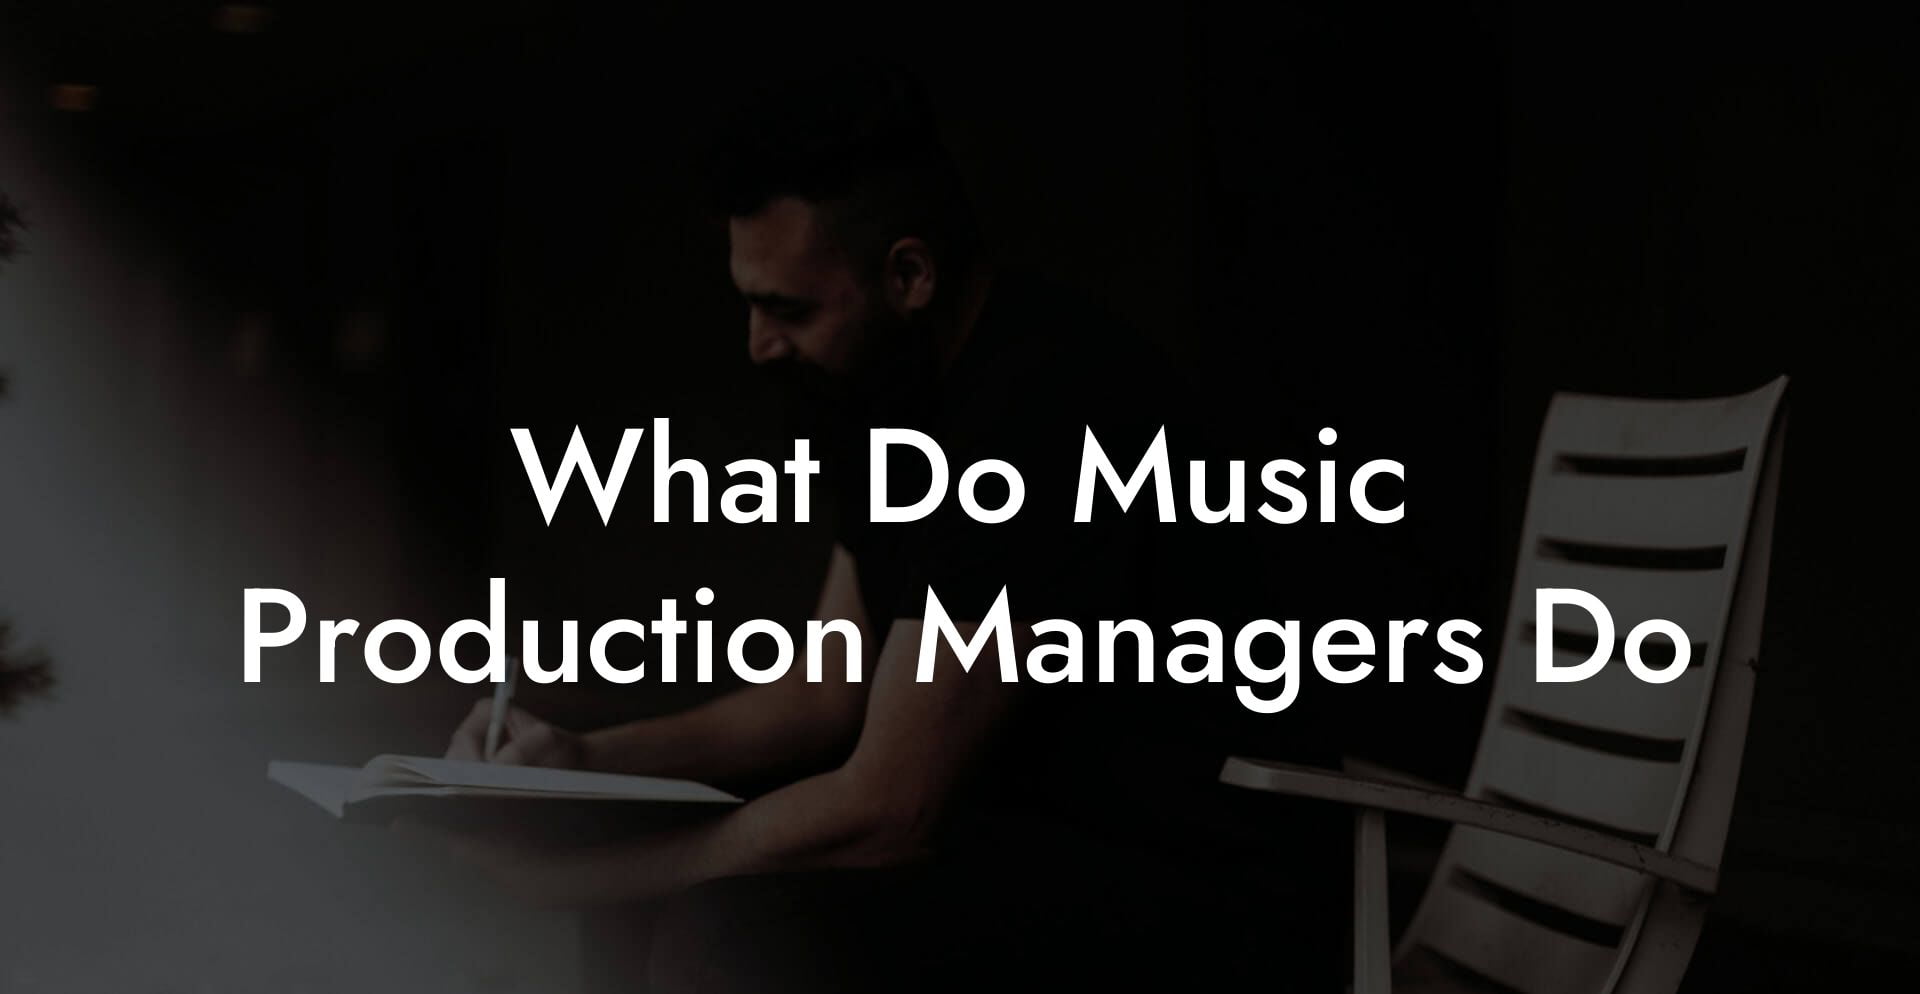 What Do Music Production Managers Do